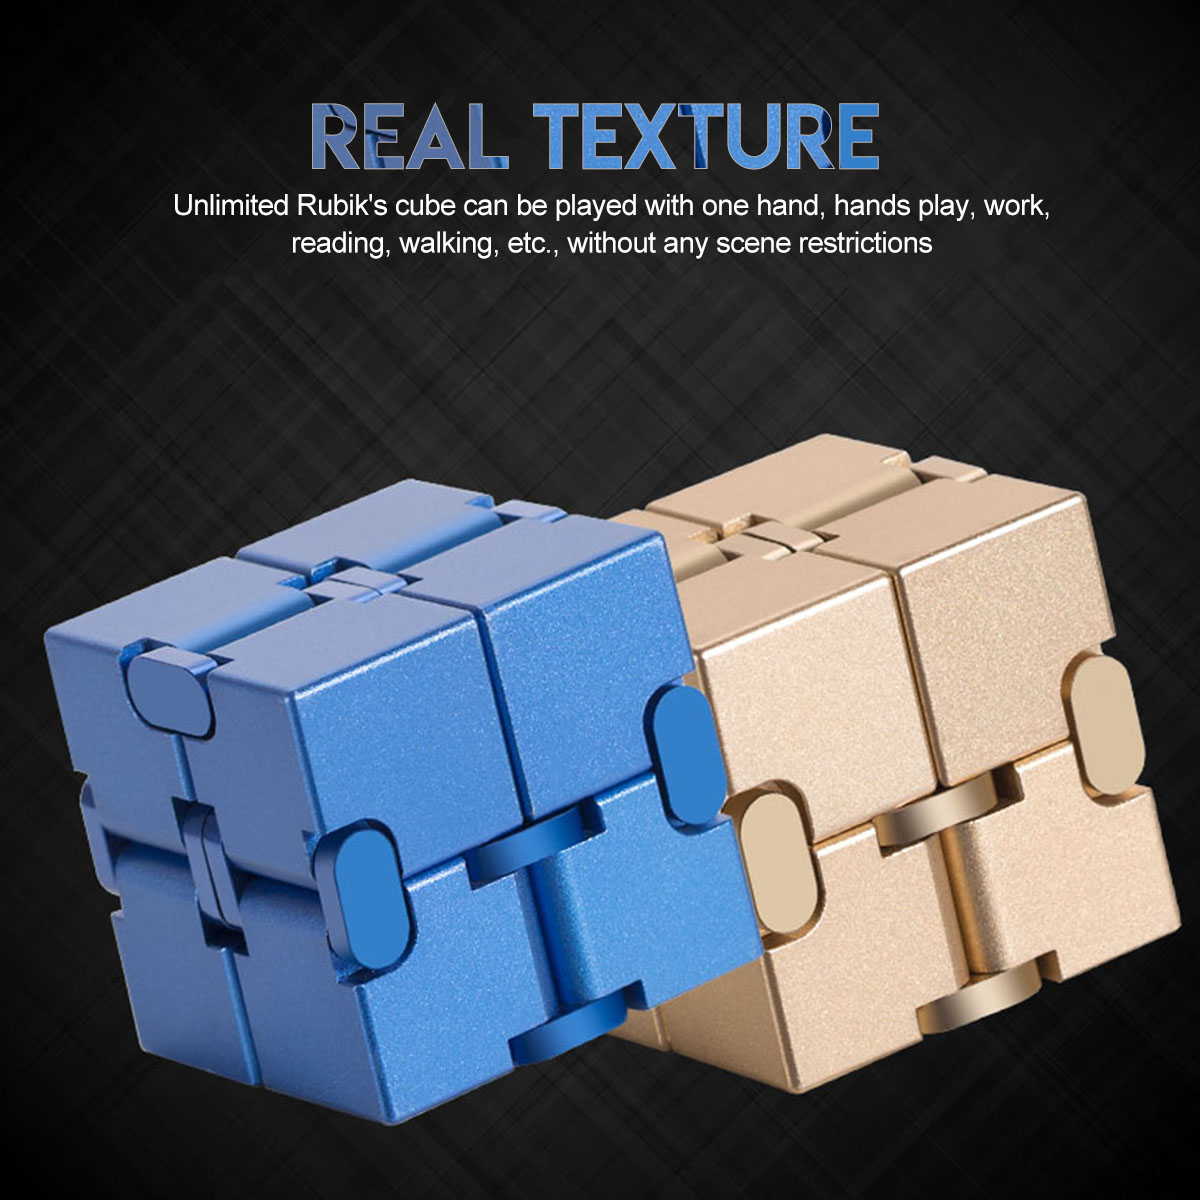 Mini-Infinity-Funny-Magic-Cube-Aluminum-Alloy-Anxiety-Stress-Relief-Blocks-Toy-for-Kids-Adult-1541126-2